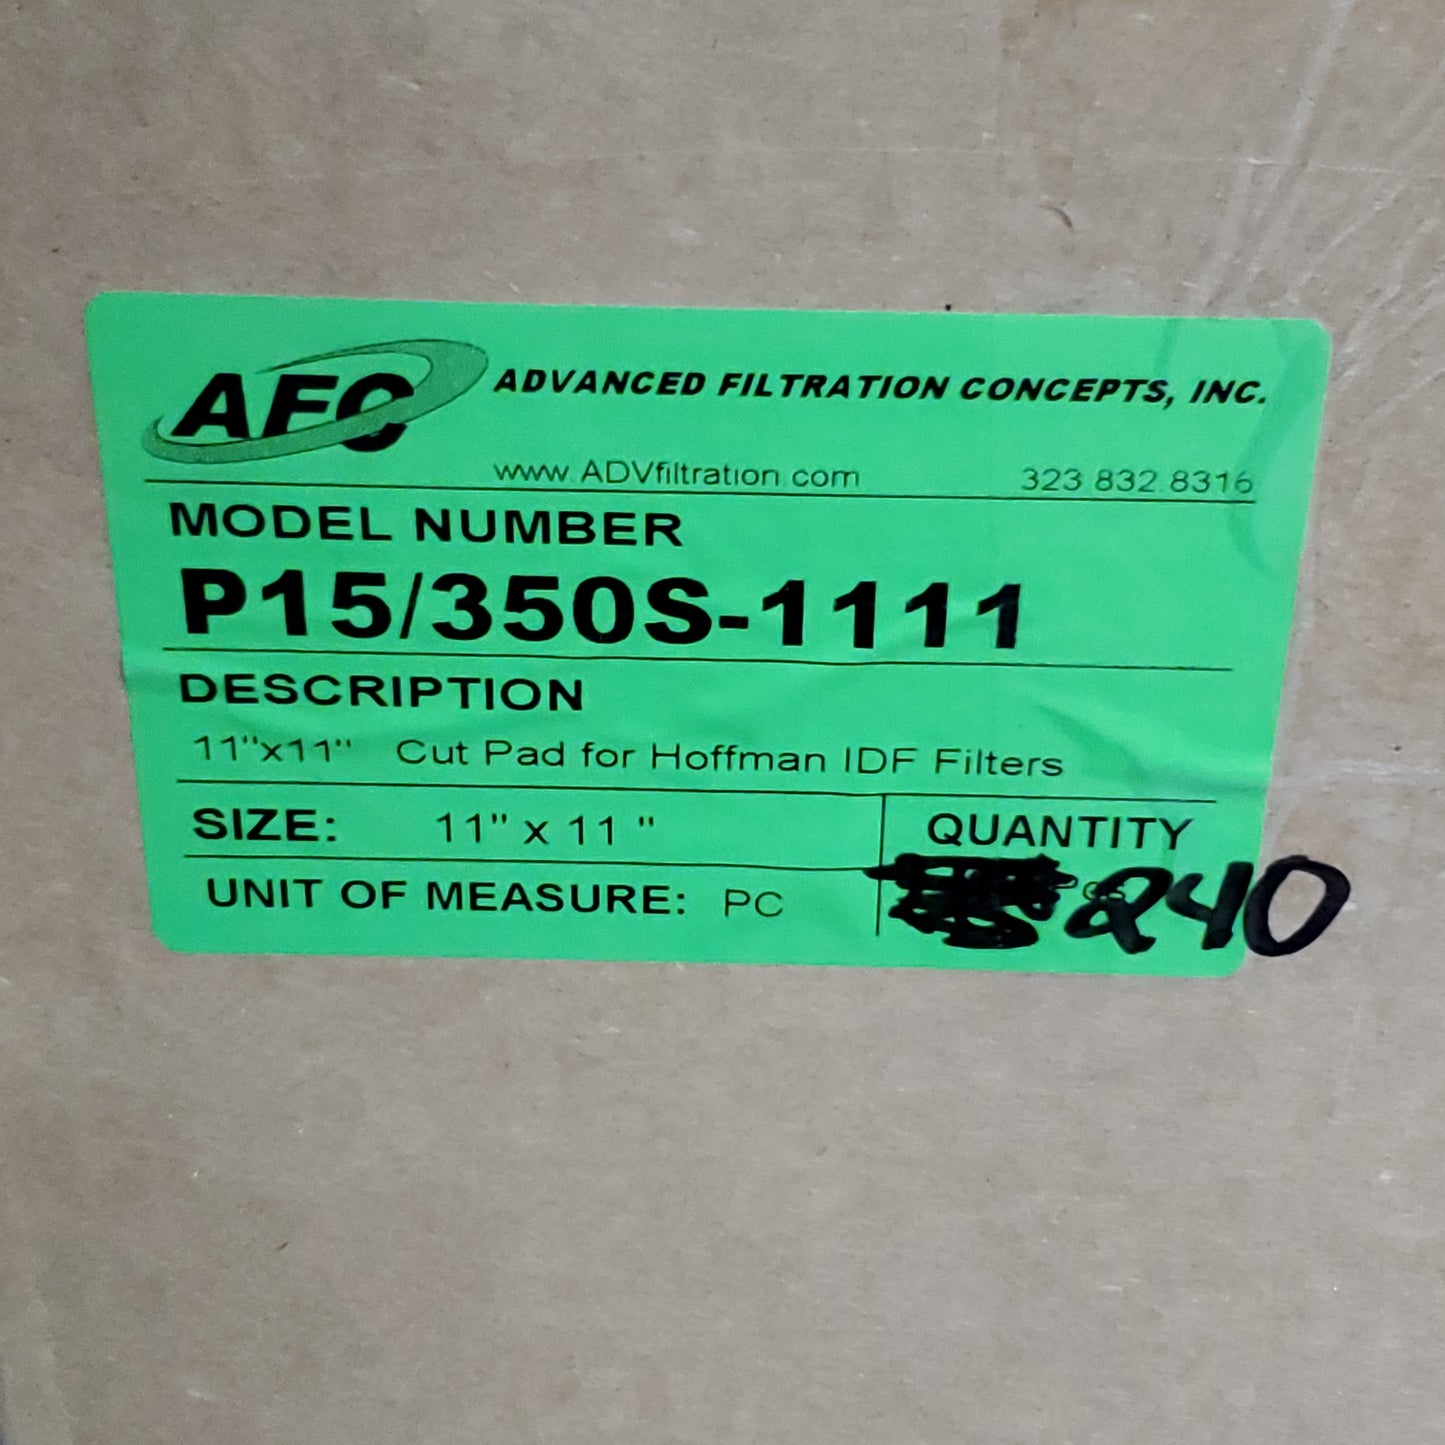 AFC Advanced Filtration Concepts 11"X11" 240 Pieces IDF Filter Pads P15/350S-1111 (New)